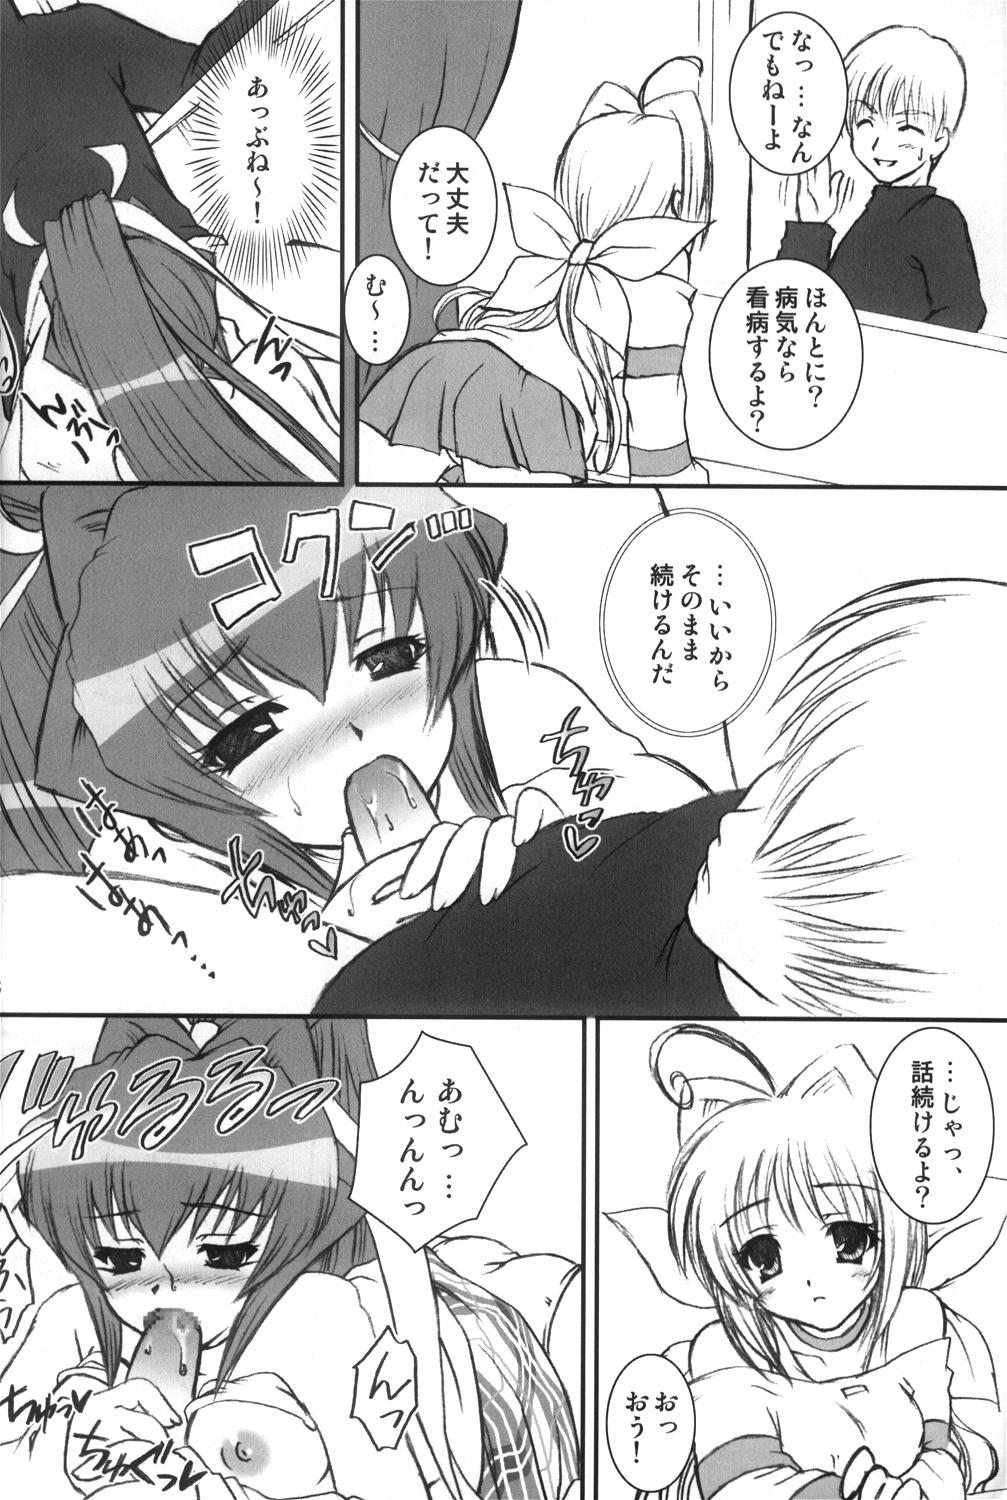 Sissy I have fallen in love with you... - Muv luv Sucking Cocks - Page 7